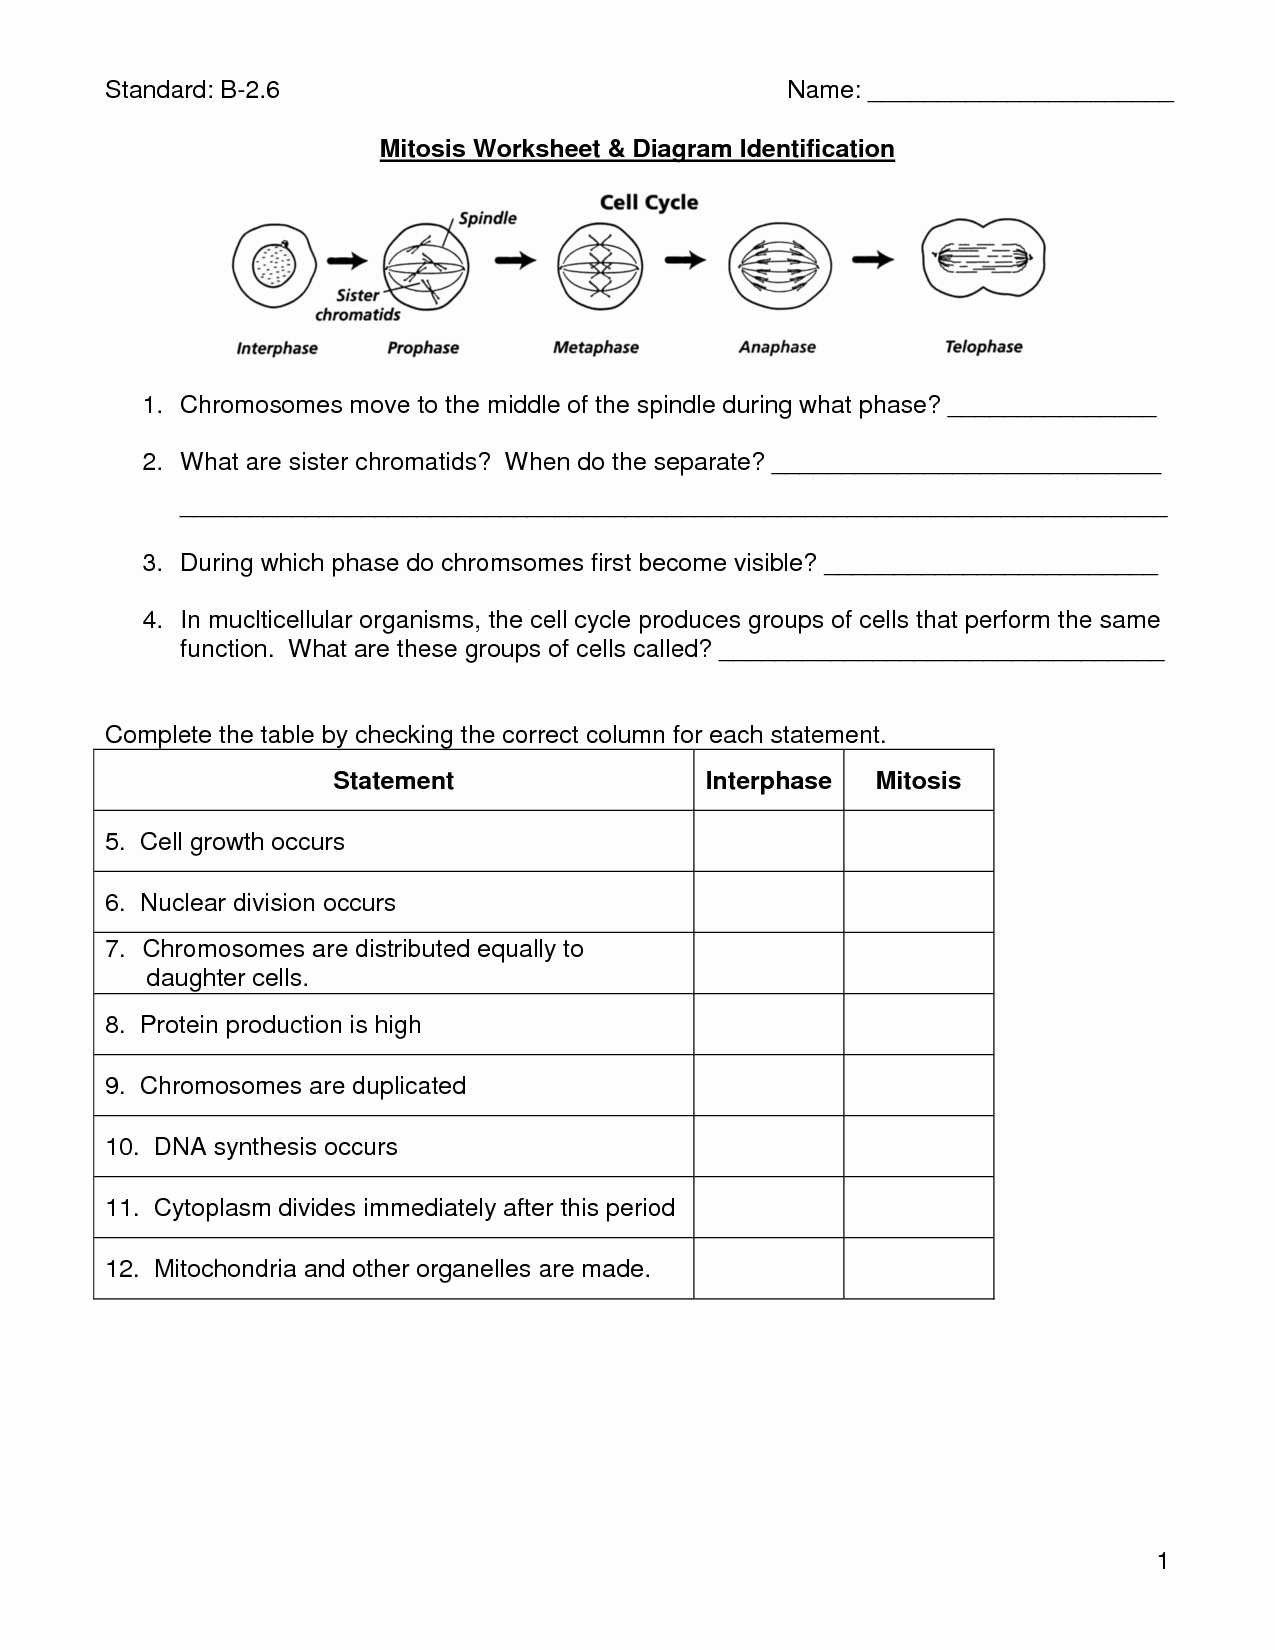 Cellular Transport Worksheet Section A Cell Membrane Structure Answer Key or Cellular Transport Worksheet Answer Key Da9de1312a9b Battk